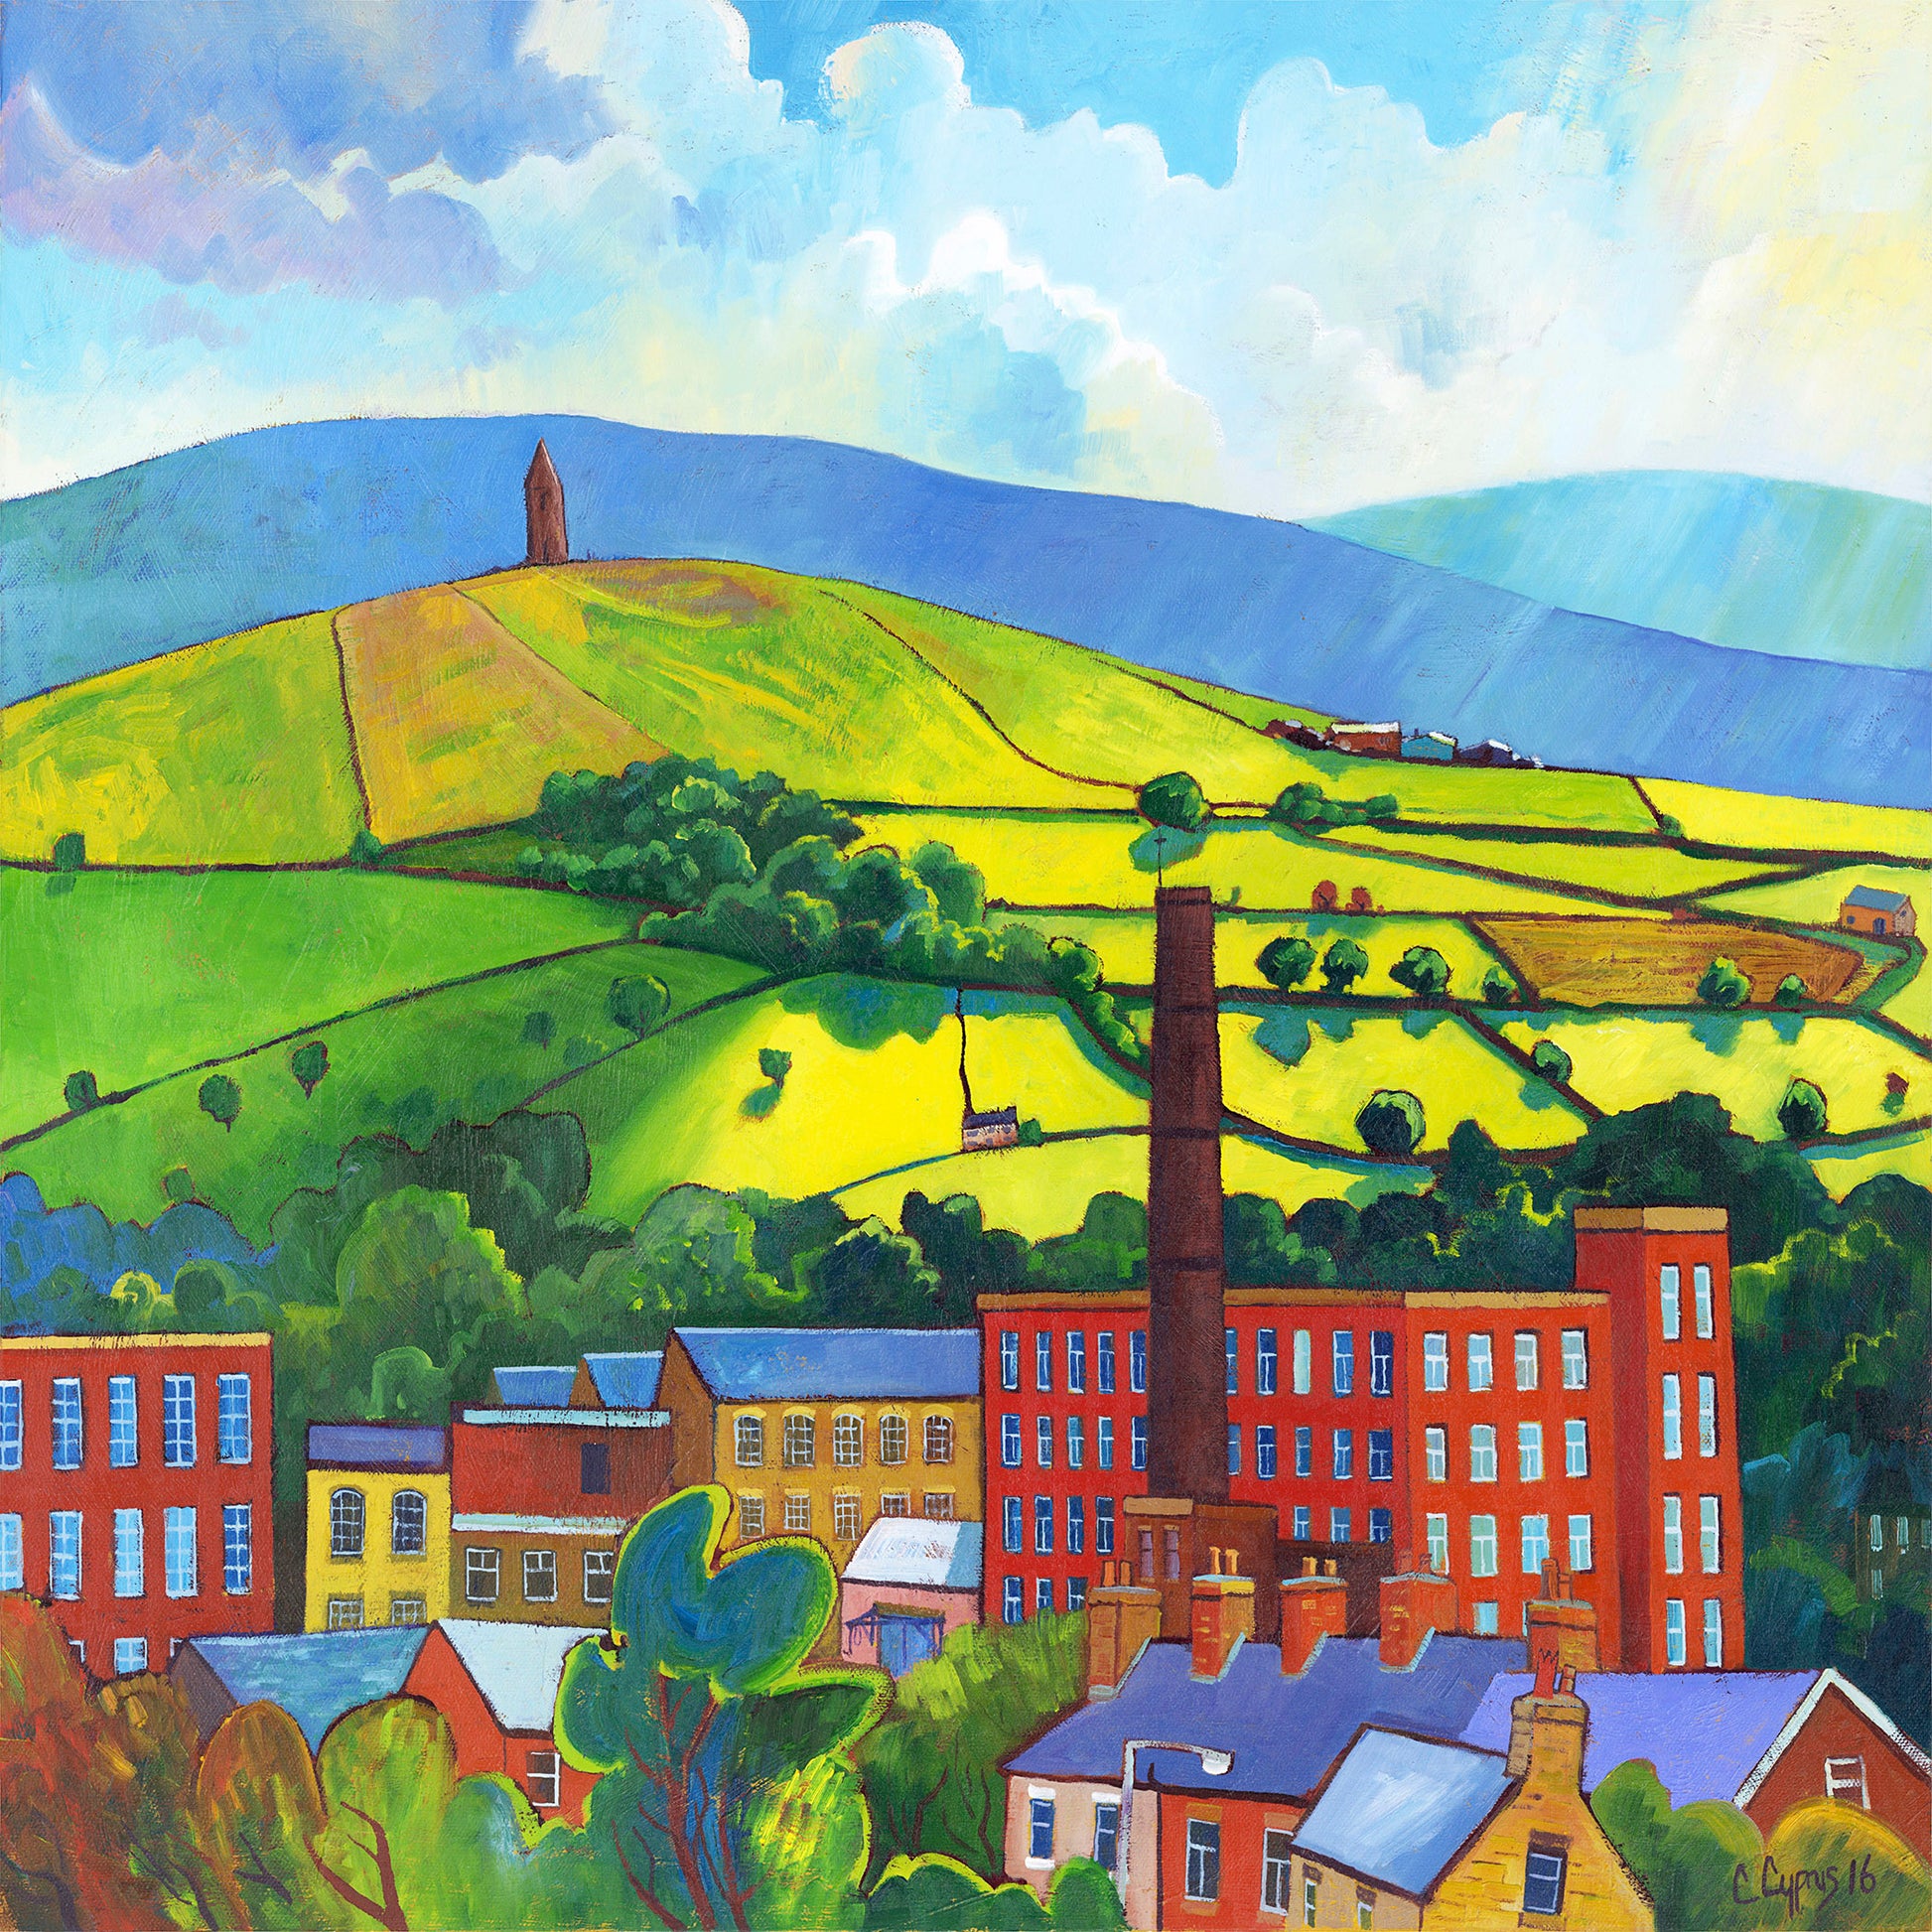 Pennine Town ~ Limited Edition Gicleé Print by Northern artist Chris Cyprus. 40cm x 40cm acyual size of print. Tube rolled for worldwide shipping